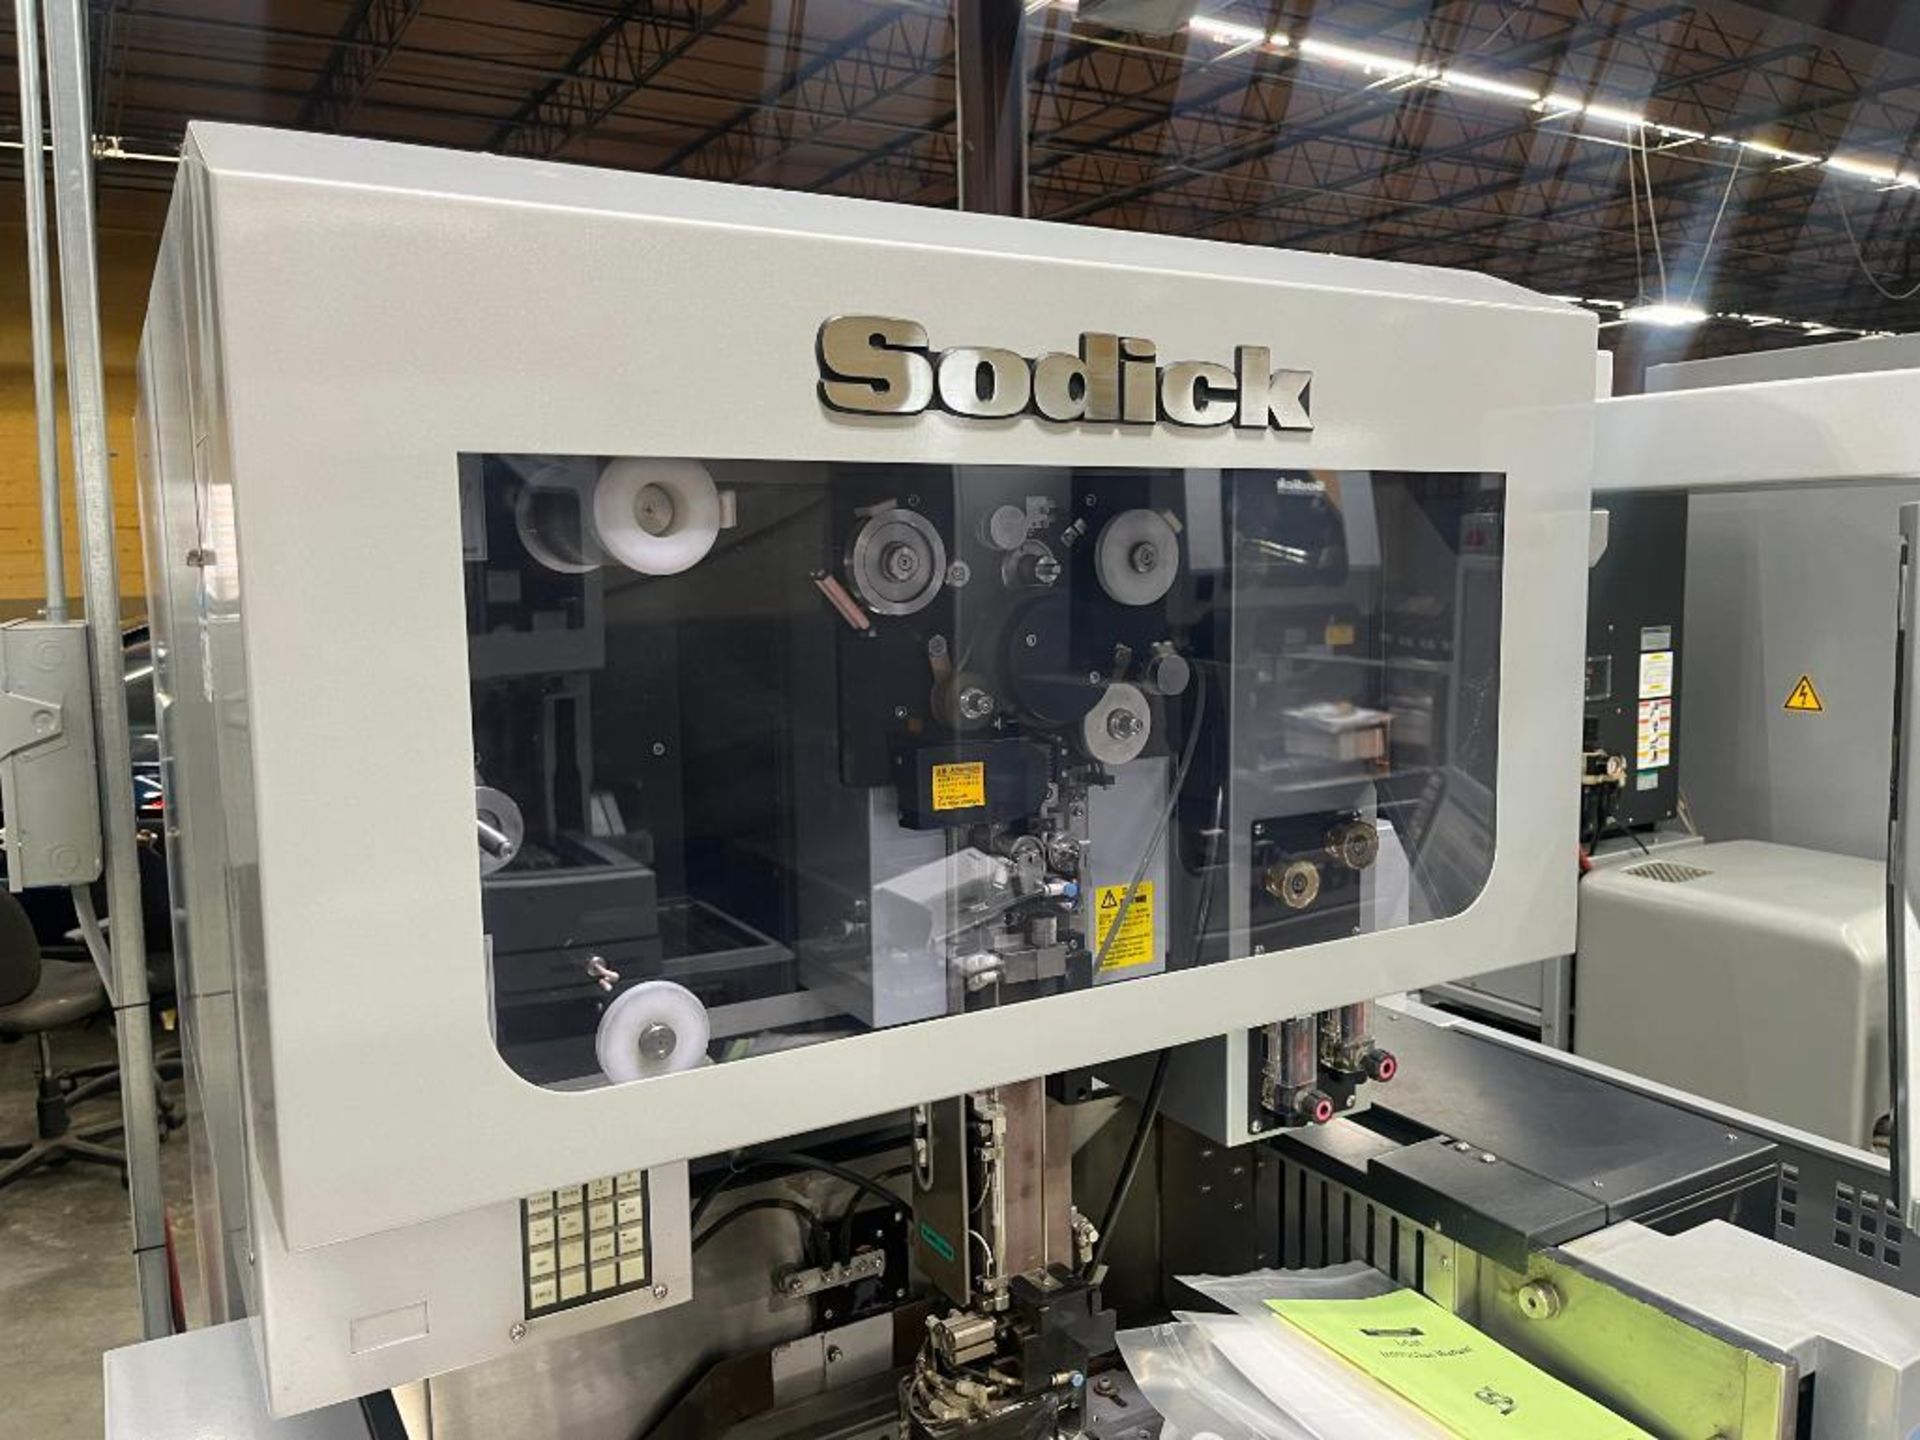 Sodick CNC Wire-Cut EDM Machine, Model VL400Q, S/N T0638 (2019) with Sodick LN2W CNC Control. With 8 - Image 10 of 41